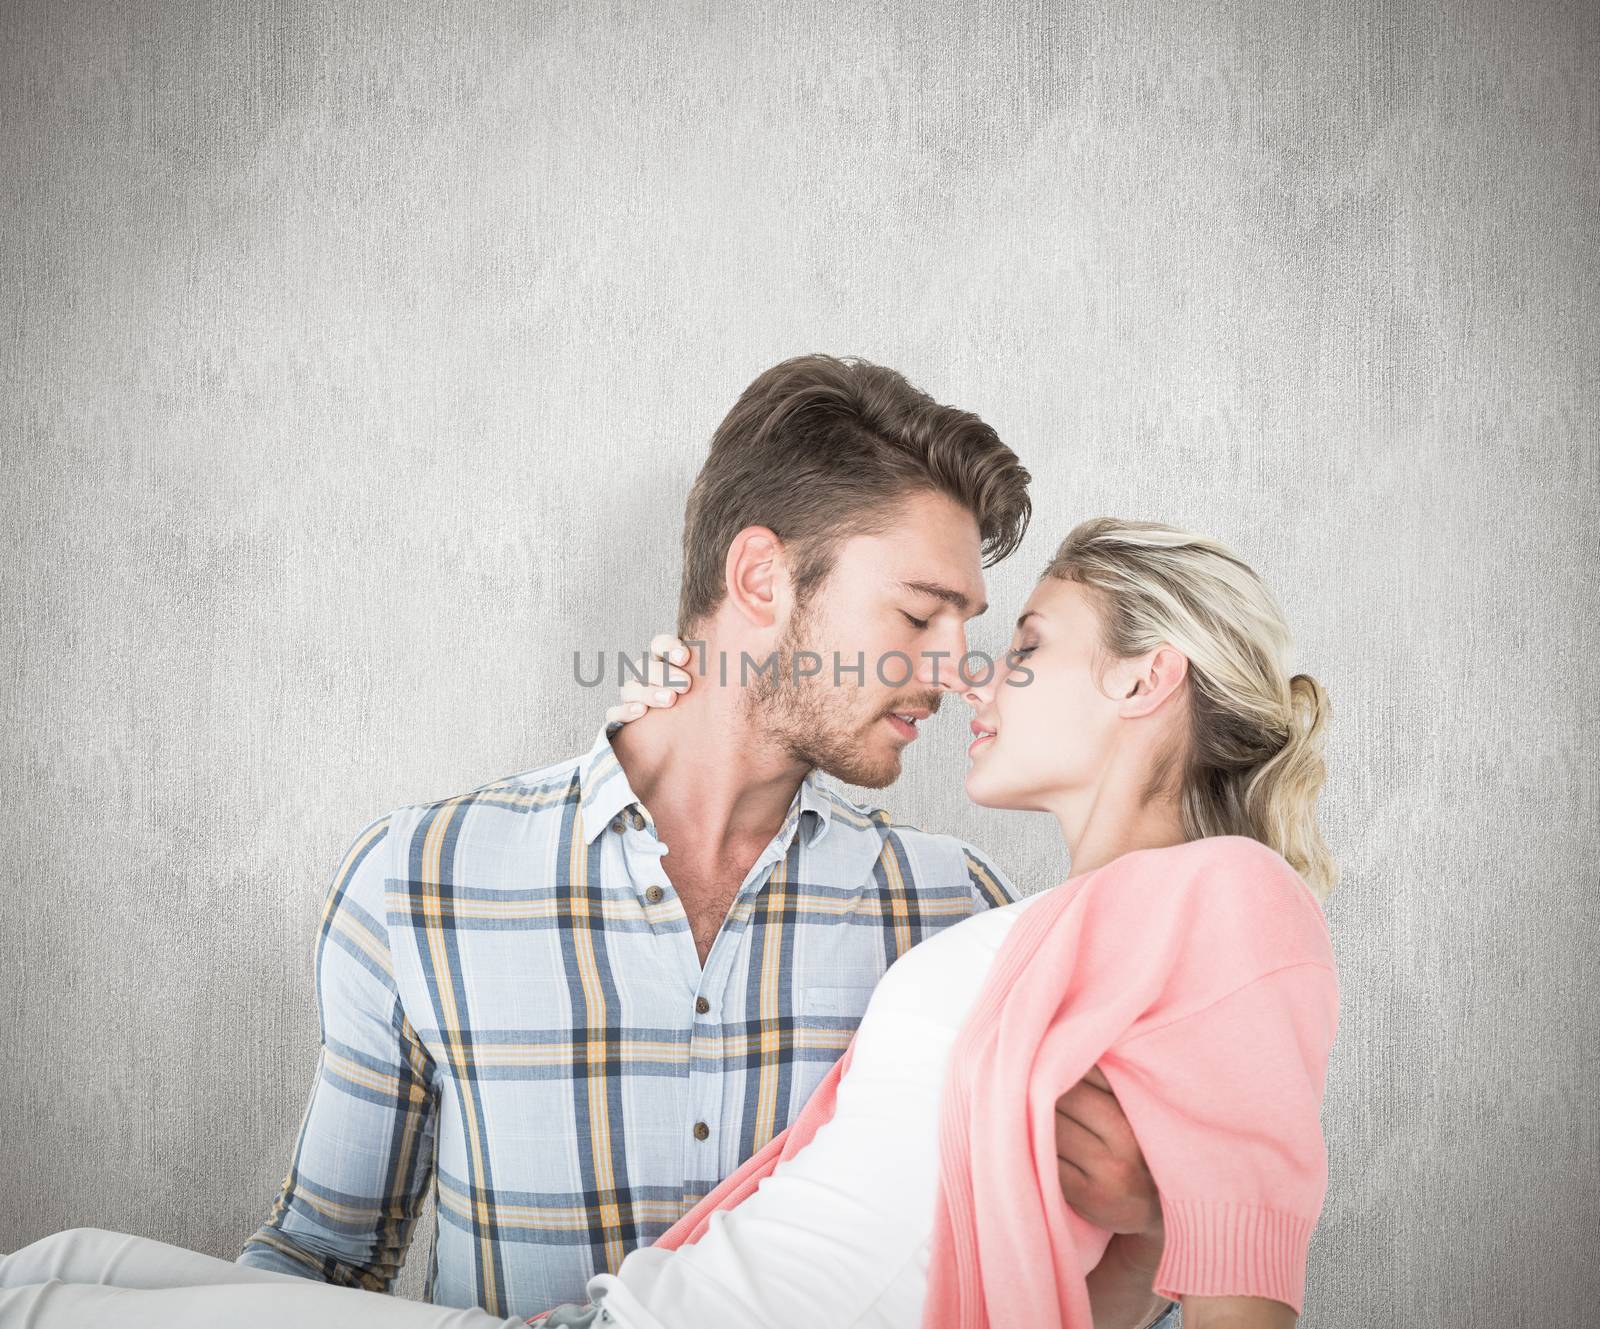 Handsome man picking up and hugging his girlfriend against white background